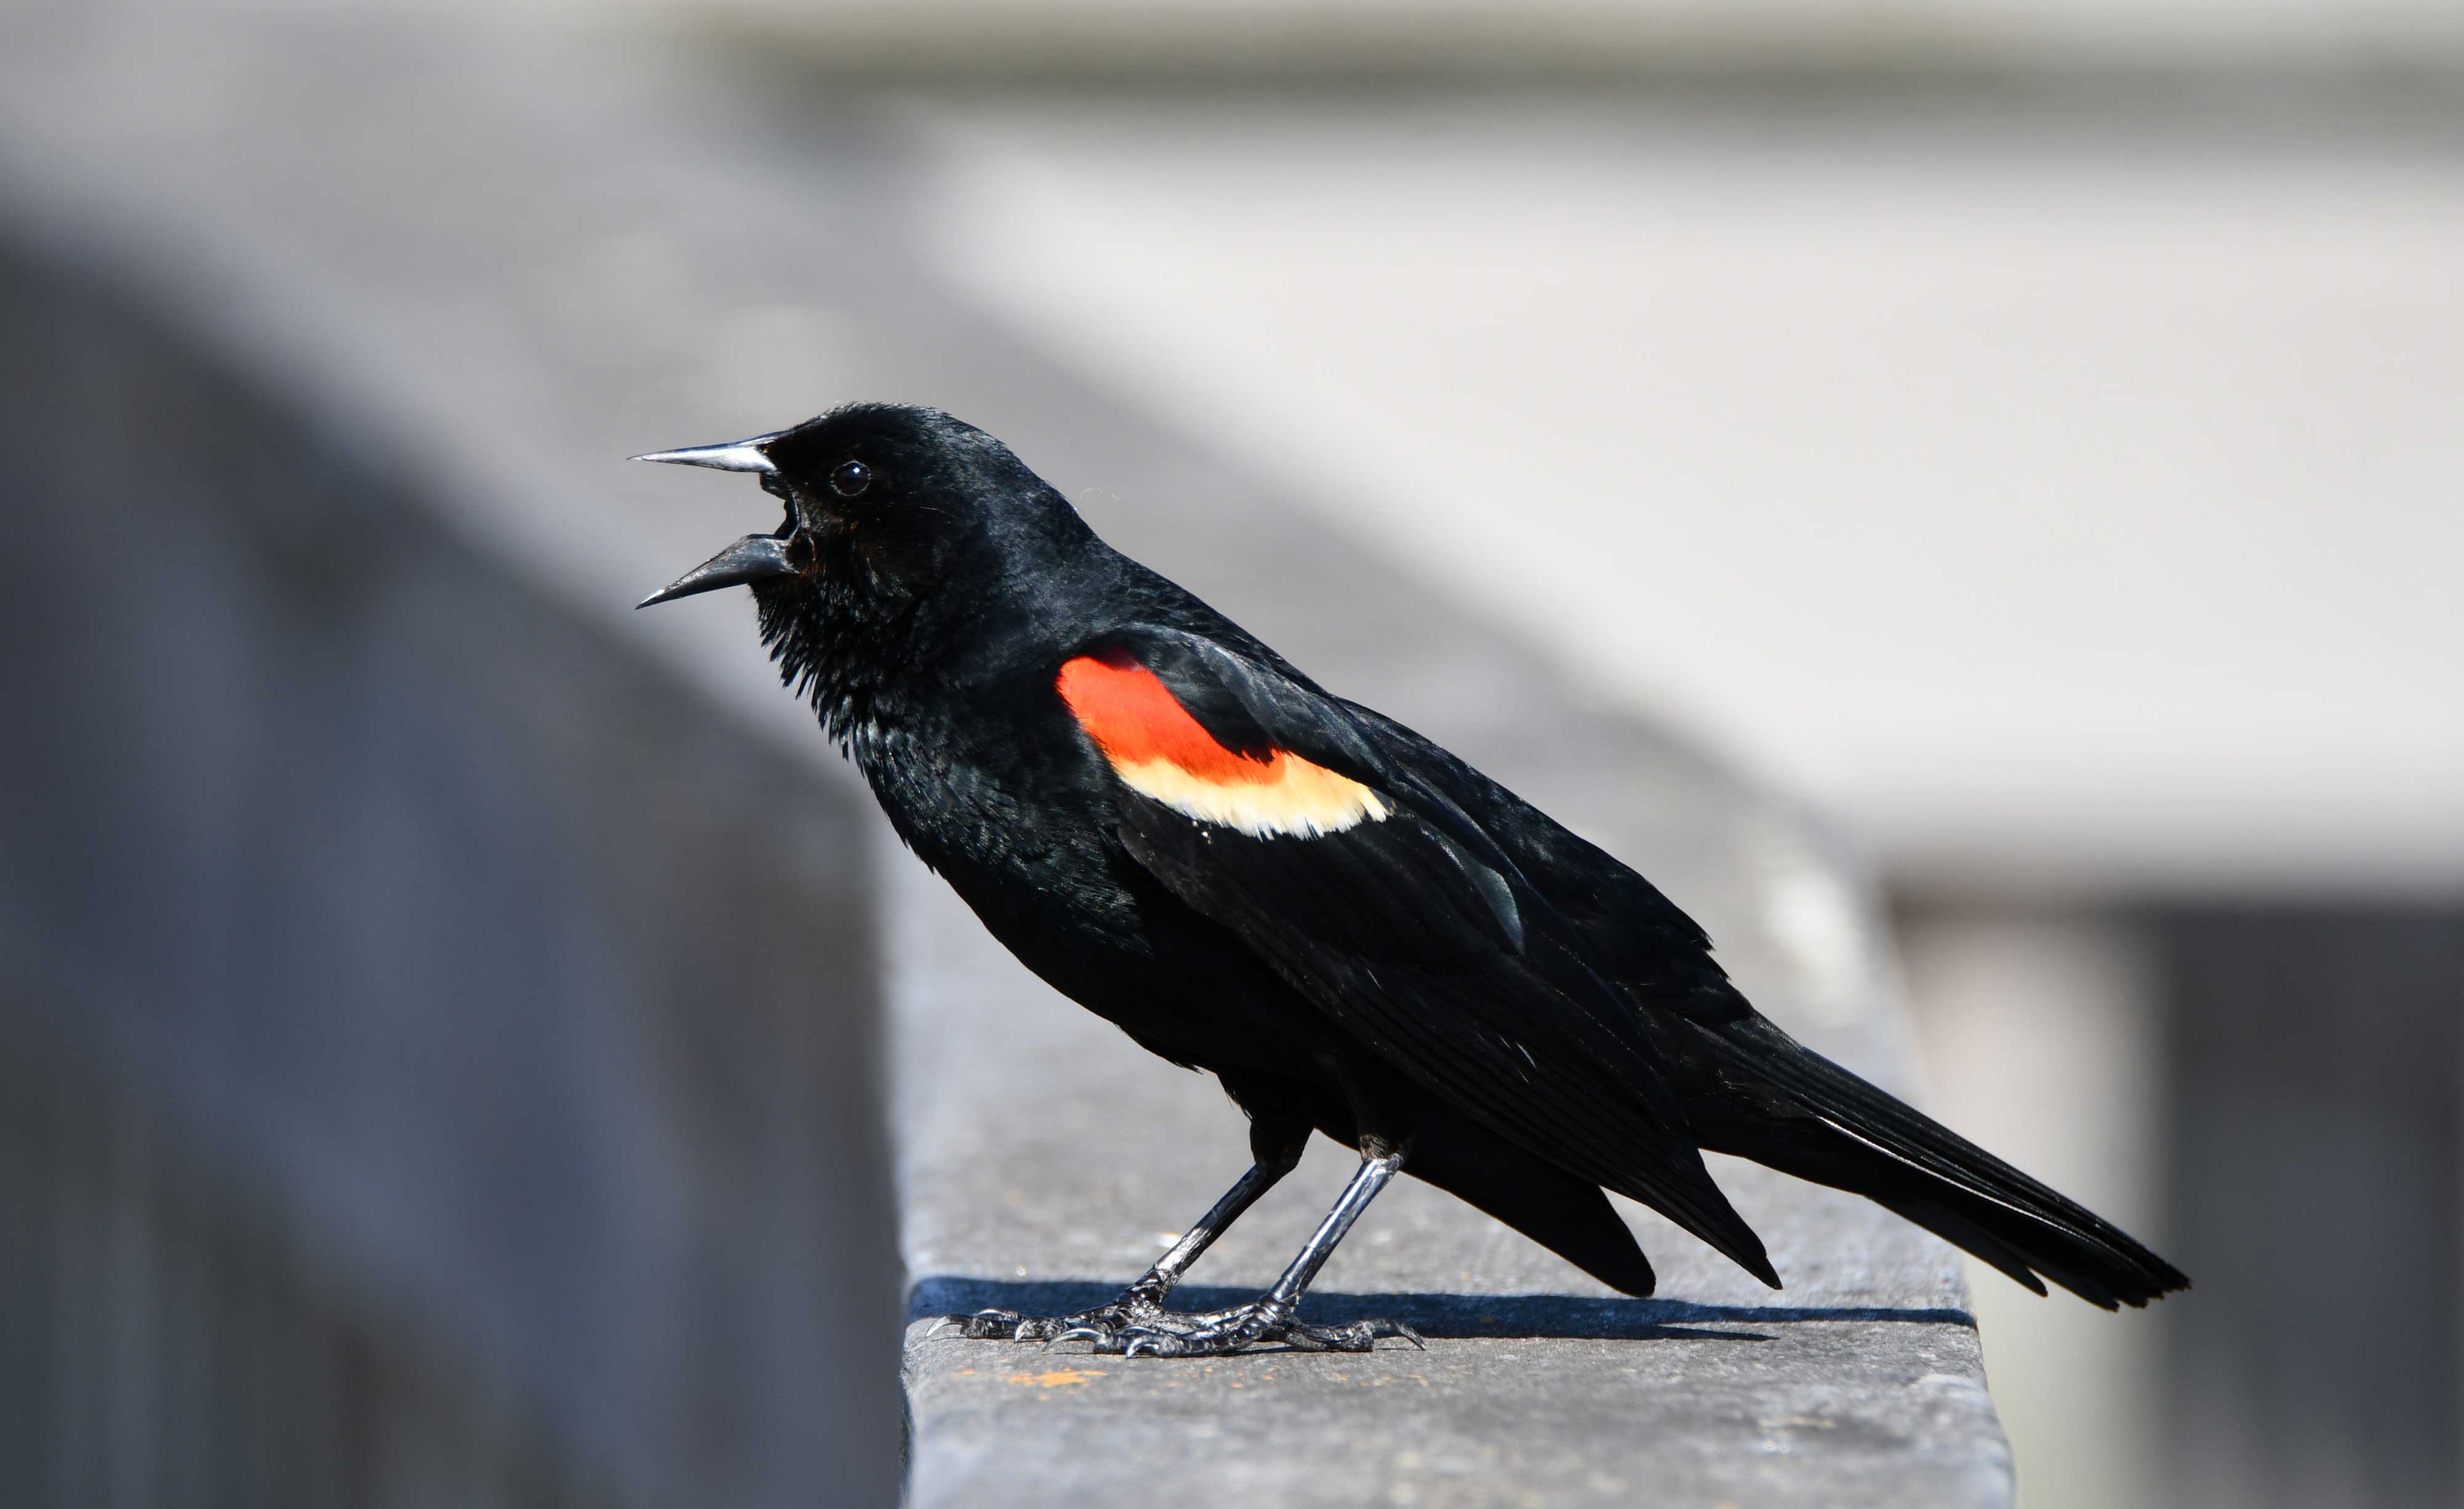 A red-winged blackbird with its mouth open.